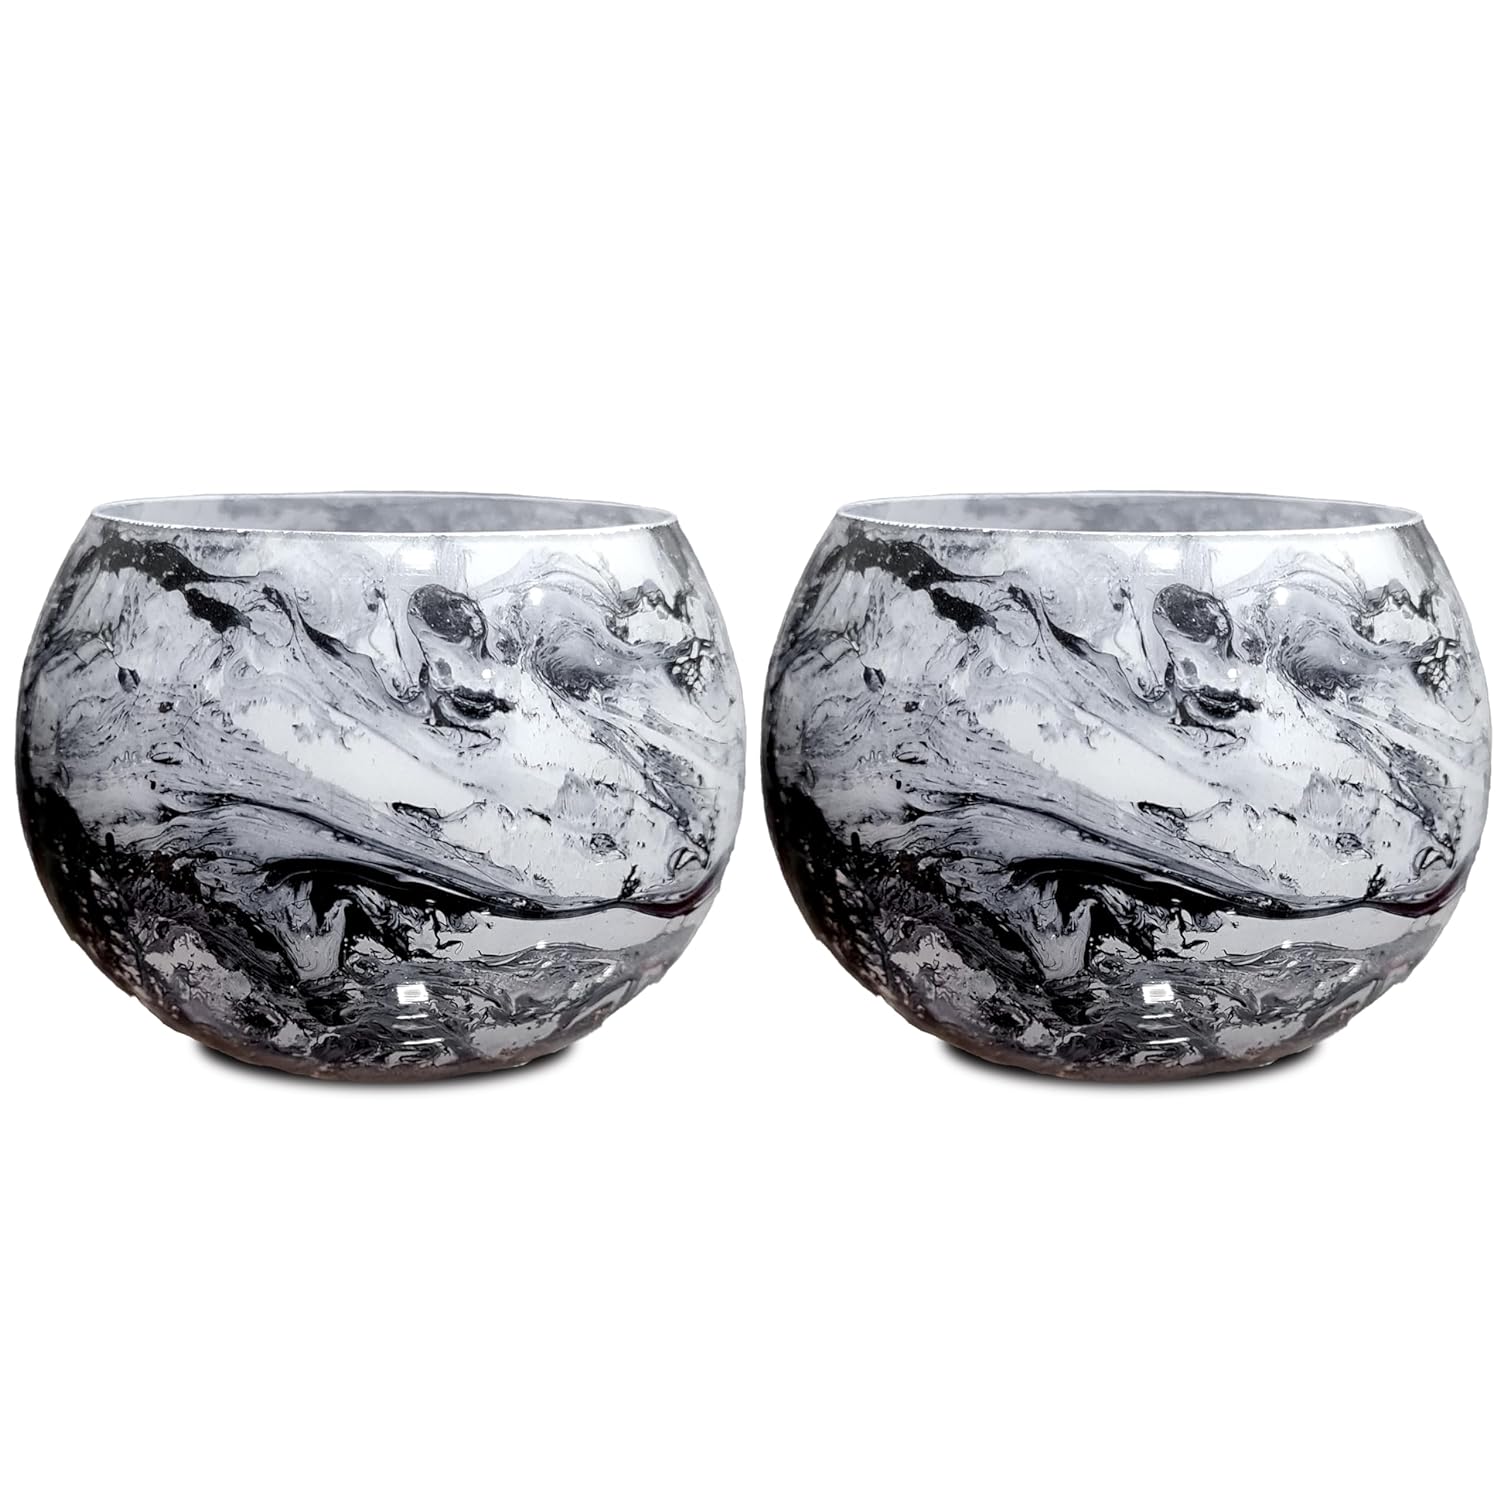 Two marble bowls on white surface